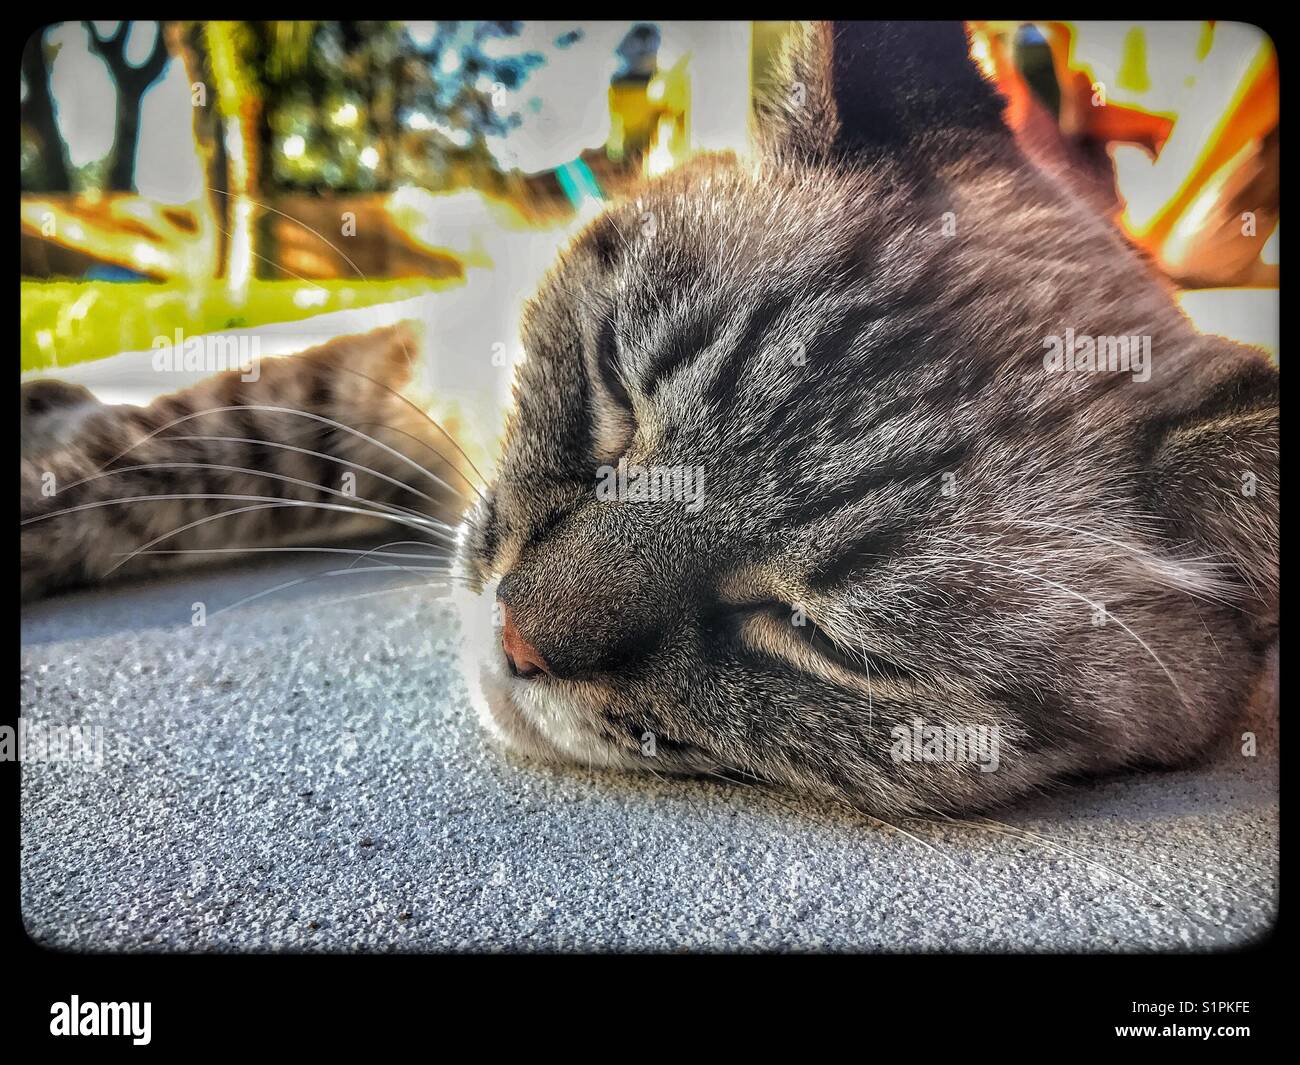 Tabby cat napping on concrete patio Stock Photo